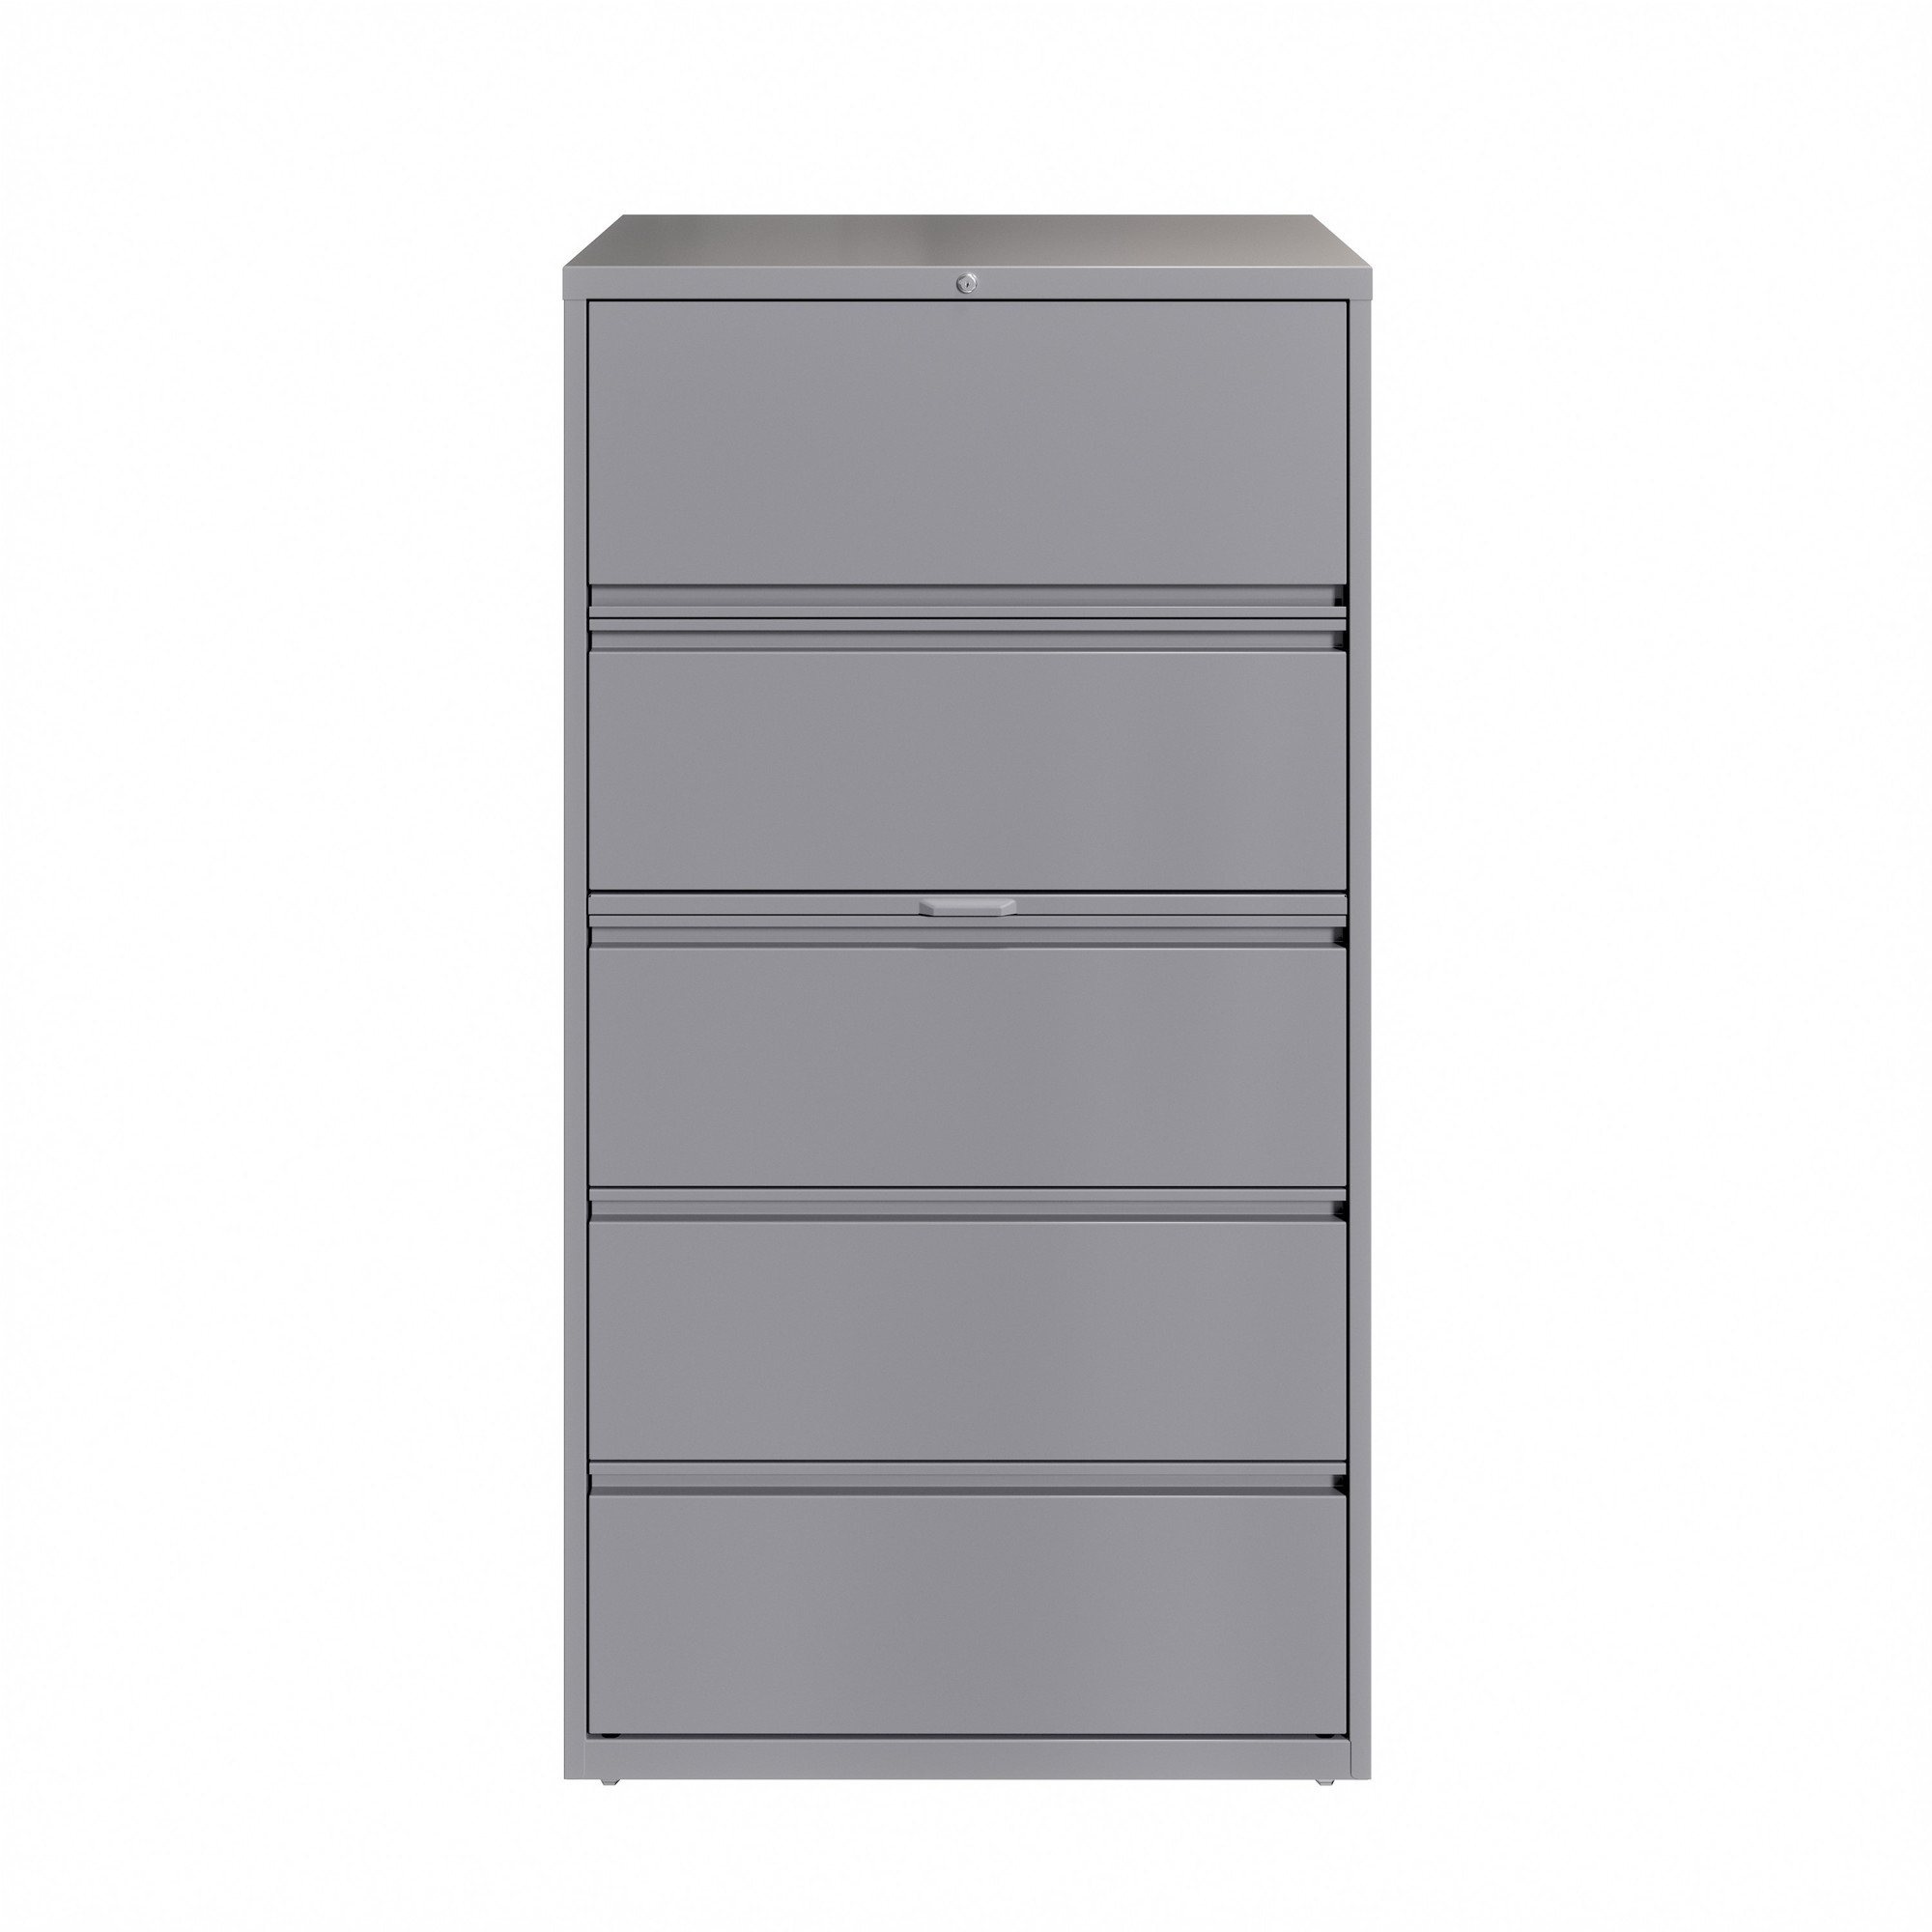 Hirsh Industries, 5 Drawer Lateral File Cabinet, Width 36 in, Depth 18.625 in, Height 67.625 in, Model 23747